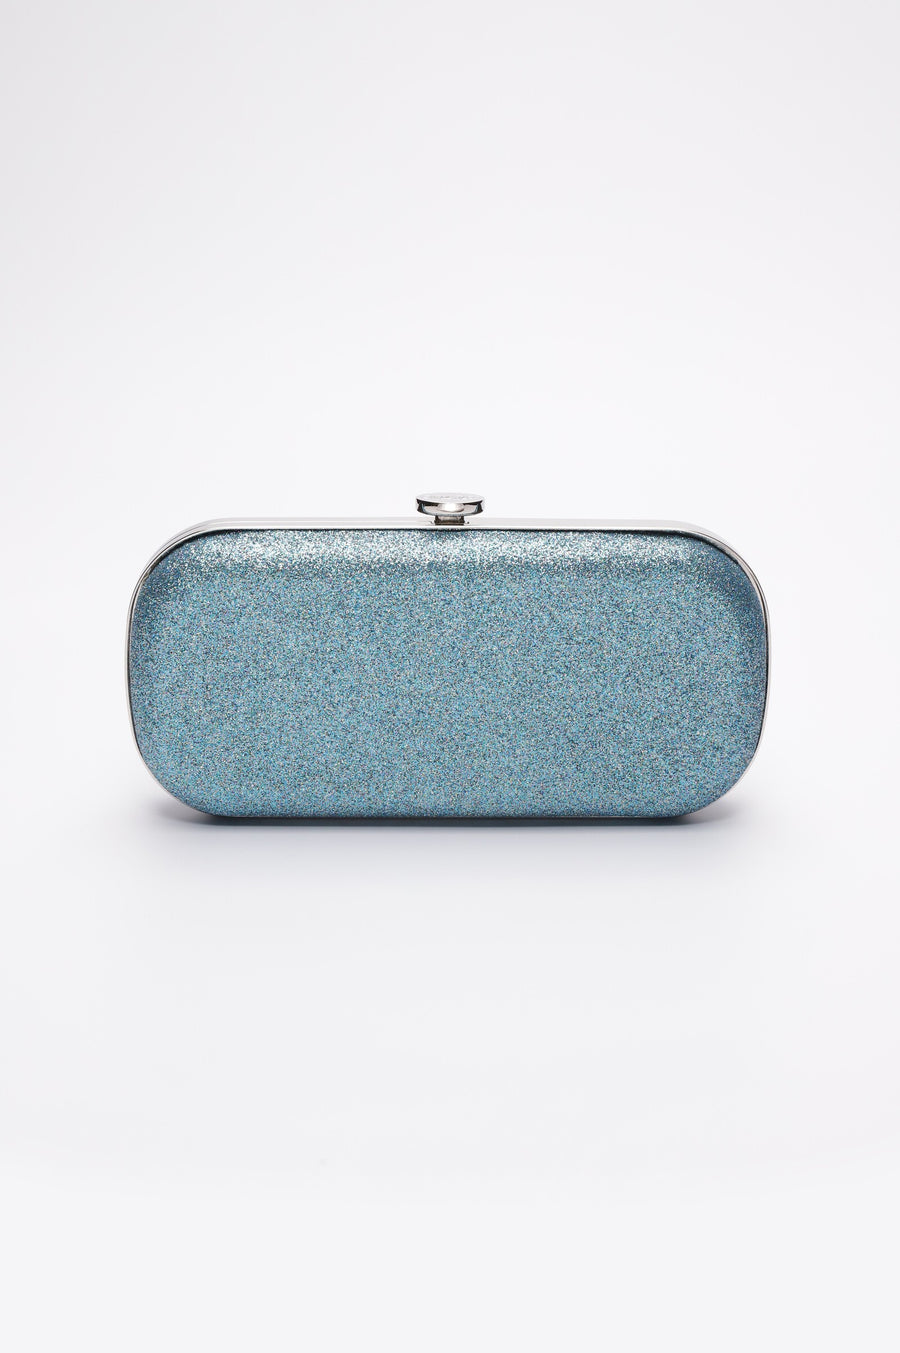 Front view of Shimmer Bella Clutch in Ocean Blue with silver clasp and hardware frame.